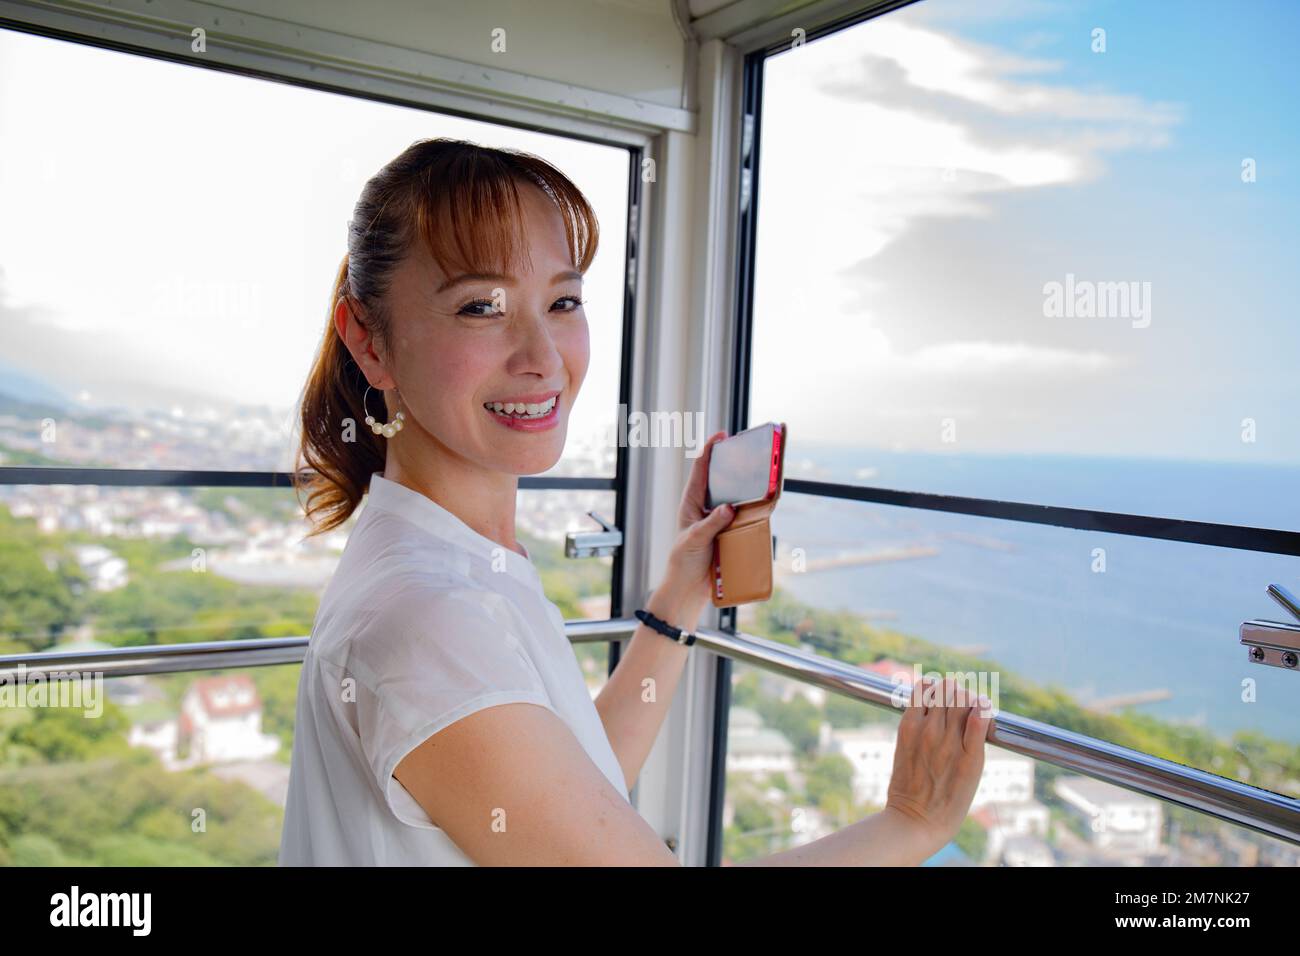 A mature Japanese woman using her mobile phone to take pictures from a cable car cabin of the city and landscape below. Stock Photo